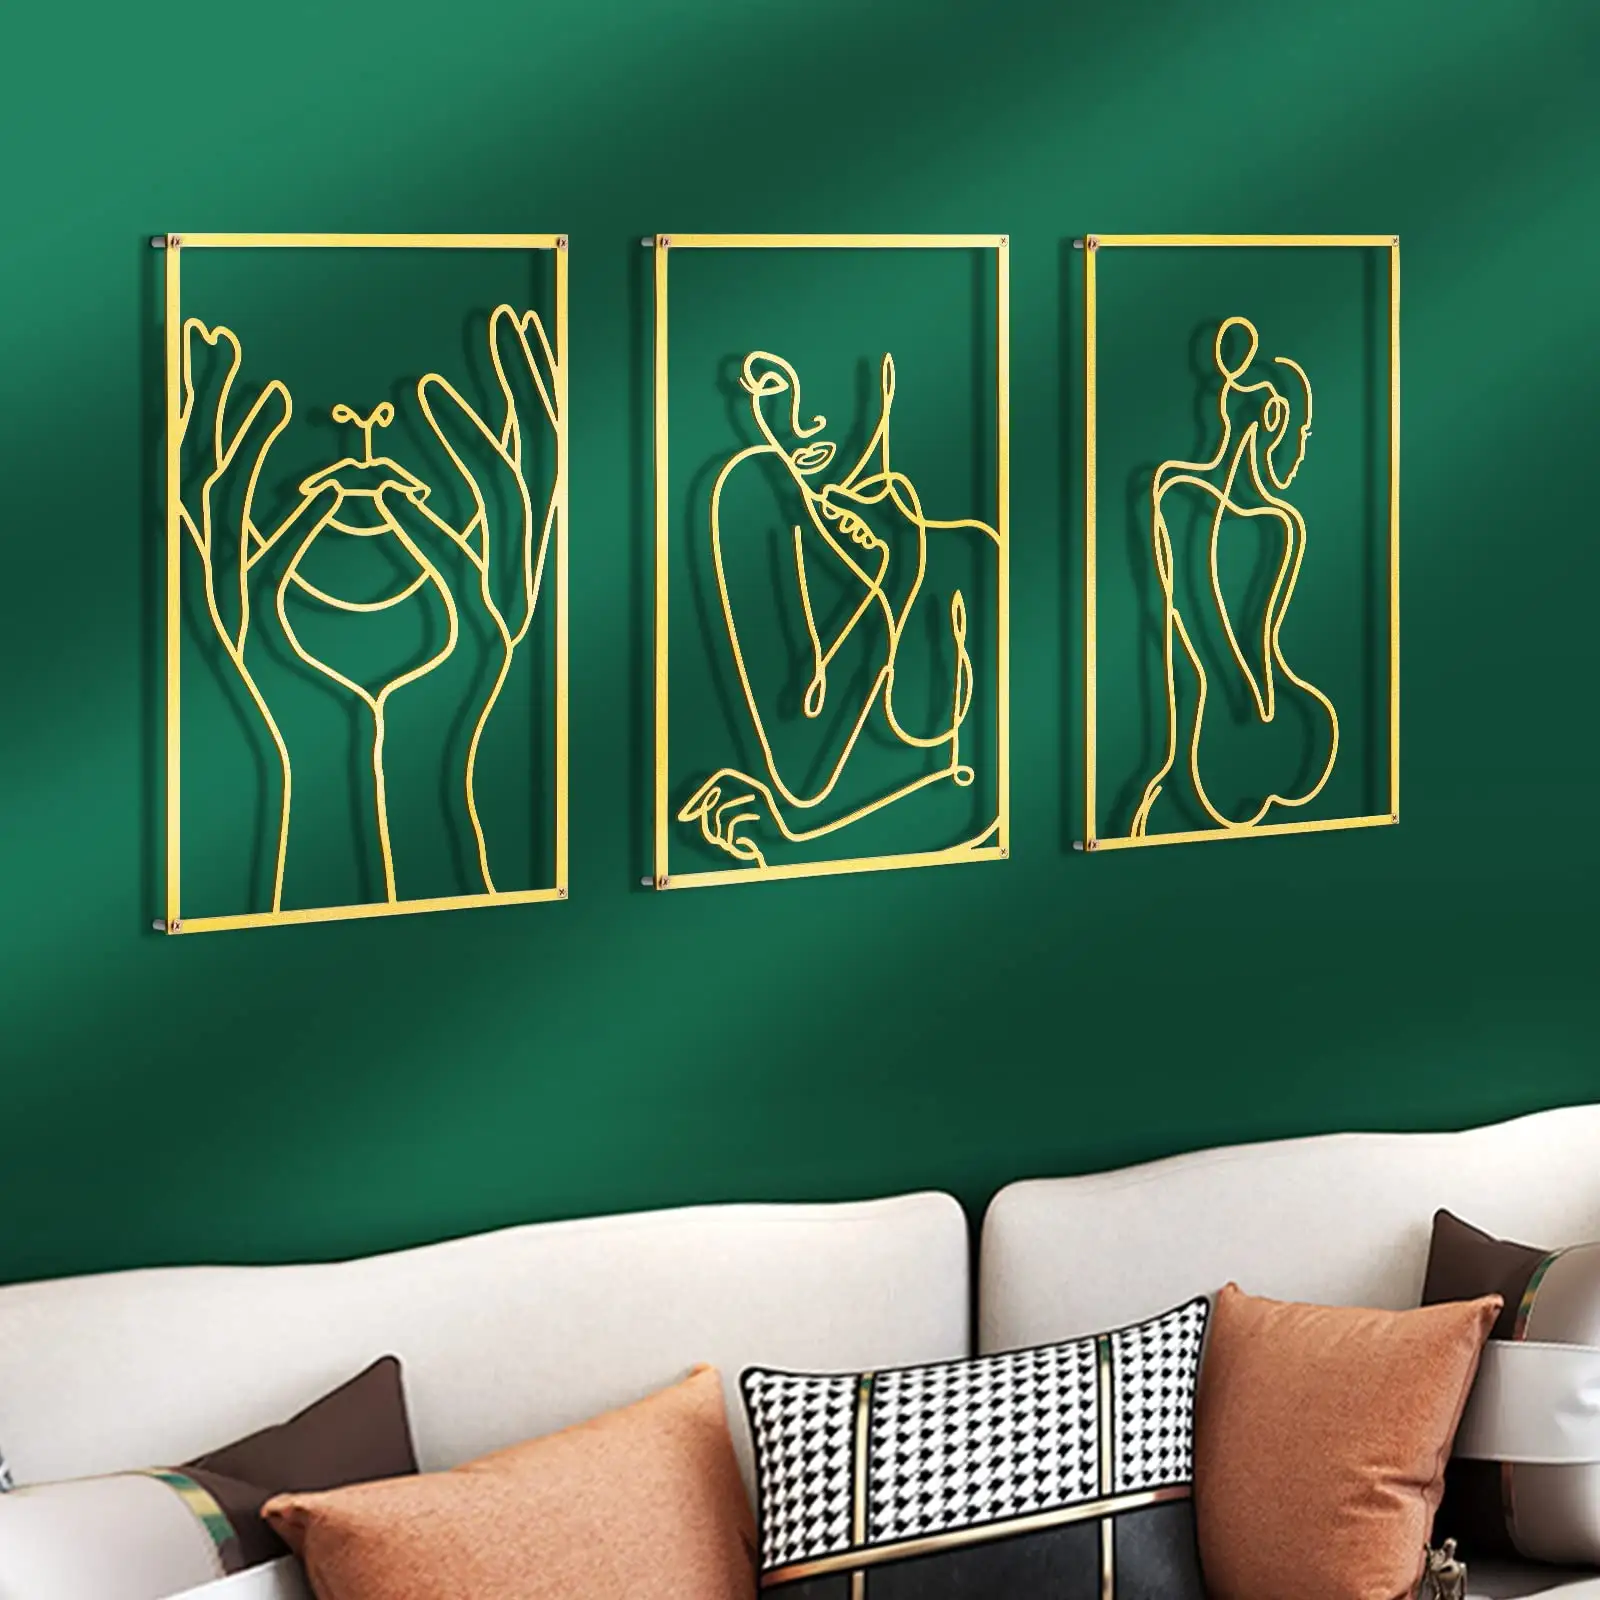 Wall Decor 3D Sculptures Abstract Minimalist Living Room Hanging Metal Modern Accents Gold Luxury Home Decorative Art Wall Decor